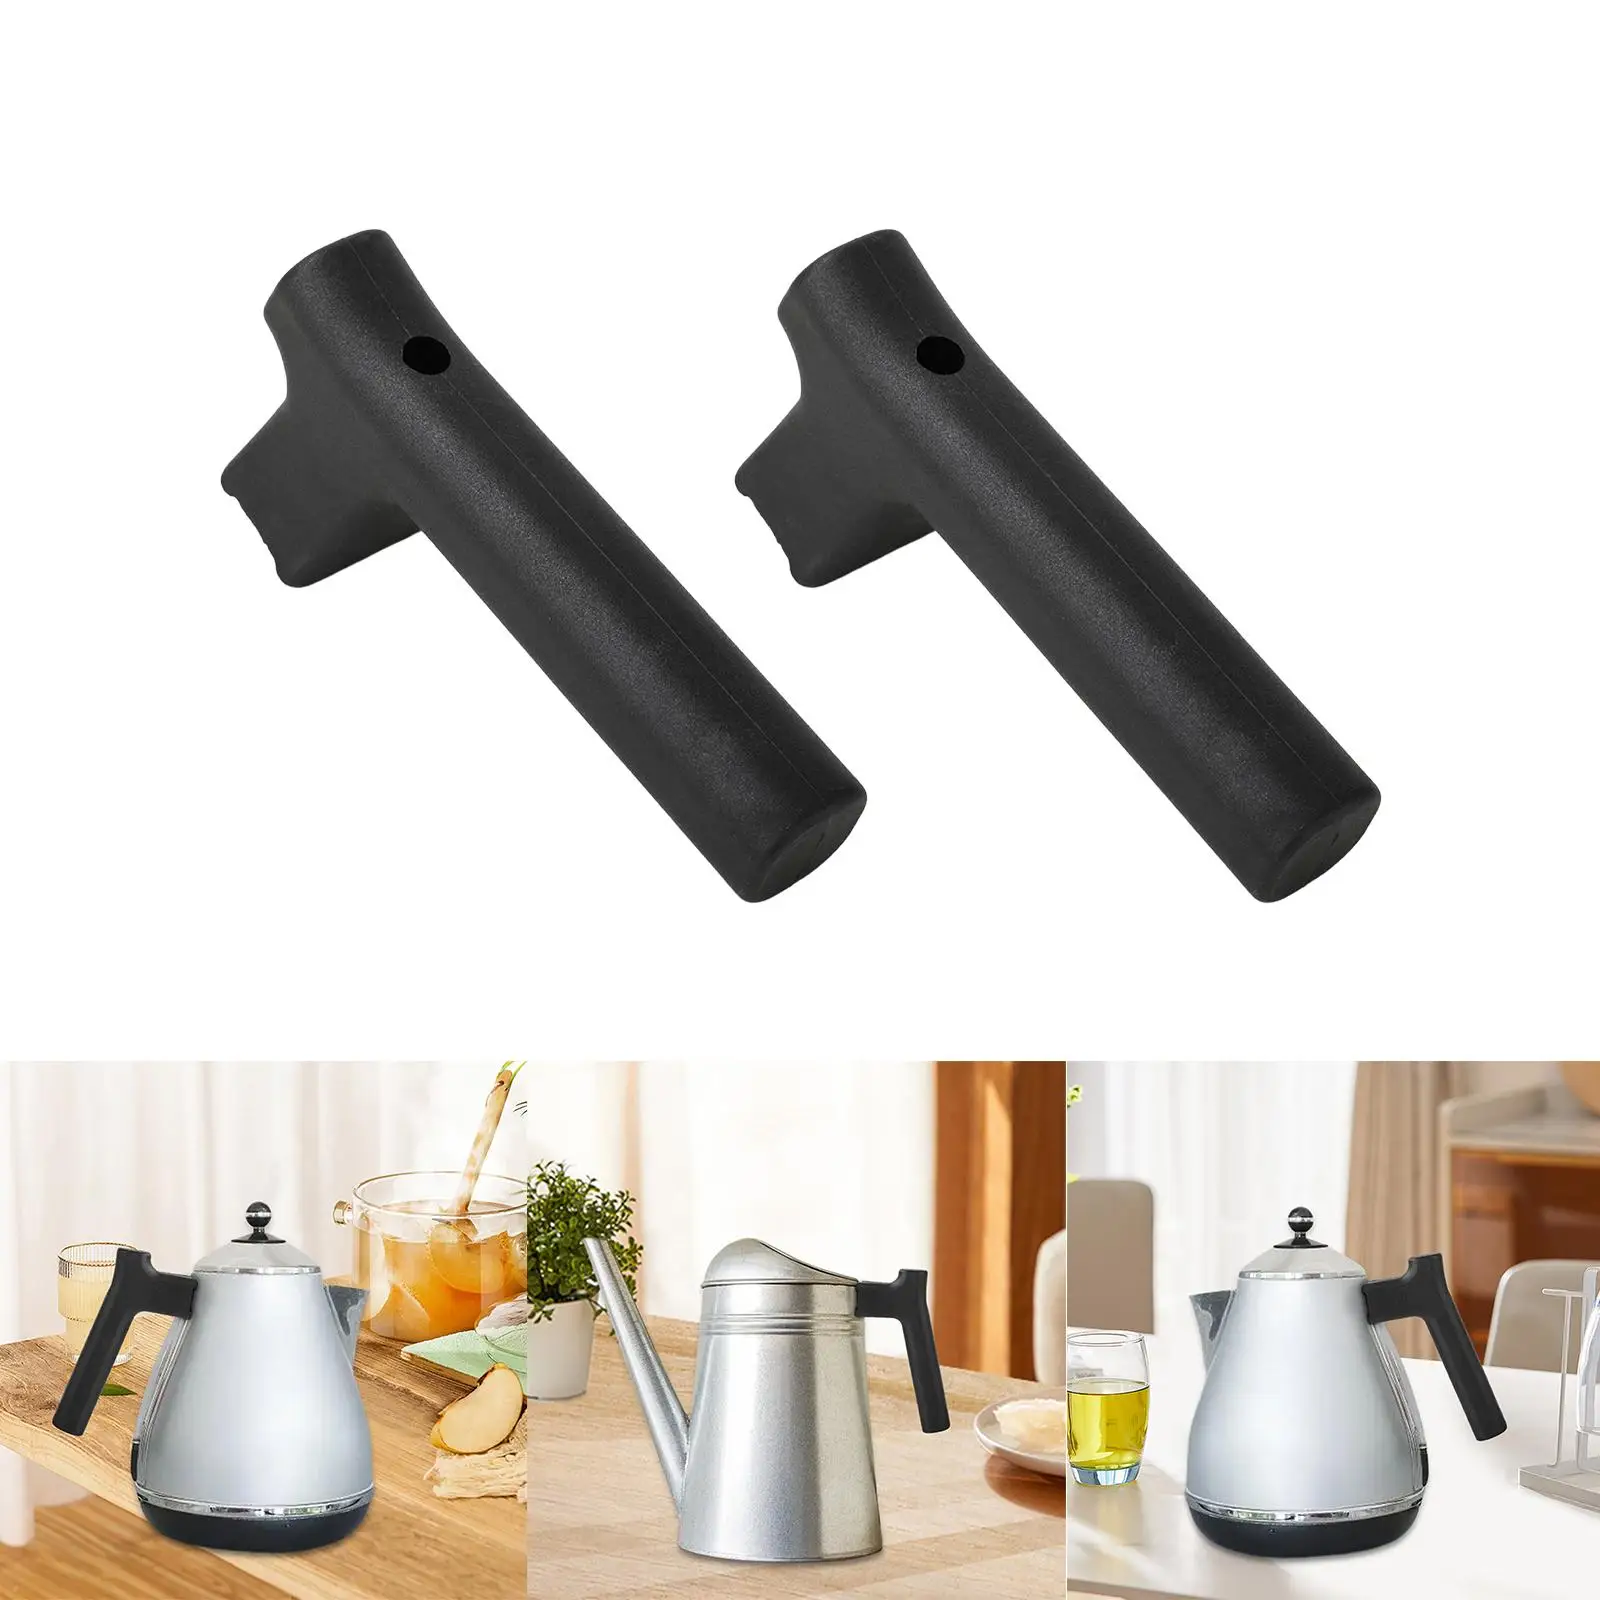 2 Pieces Kettle Handle Holder Replaces Part Wide Applications Professional Coffee Machines Tool for Kitchen Utensils Supplies